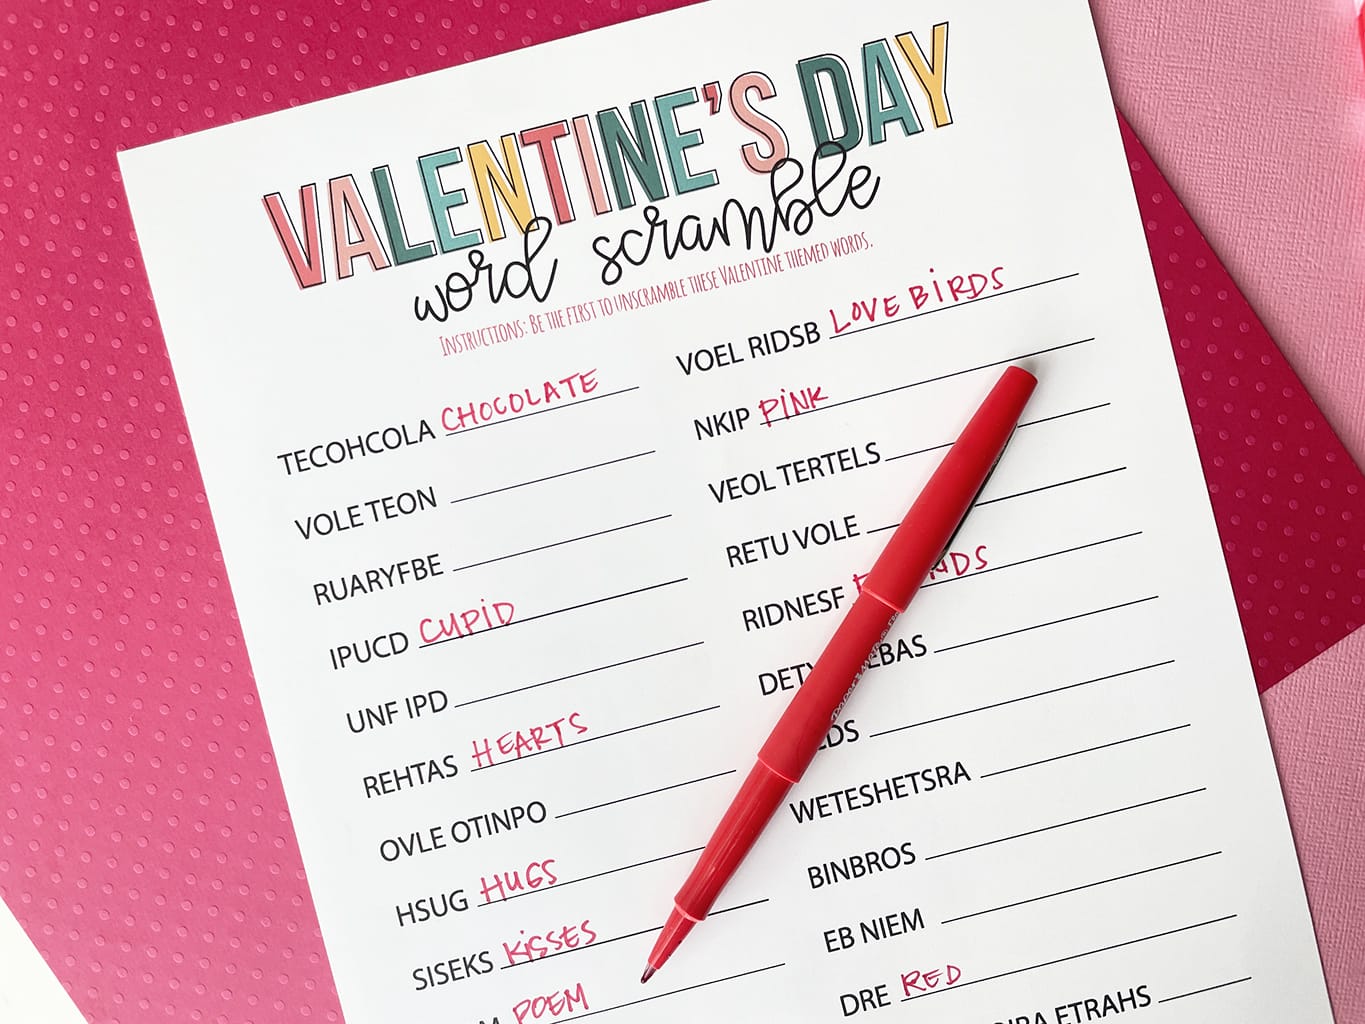 Valentines Day Word Scramble Printable Game printed out and placed on a dark pink and light pink paper backdrop. With a red fineline marker that has written in some of the answers.